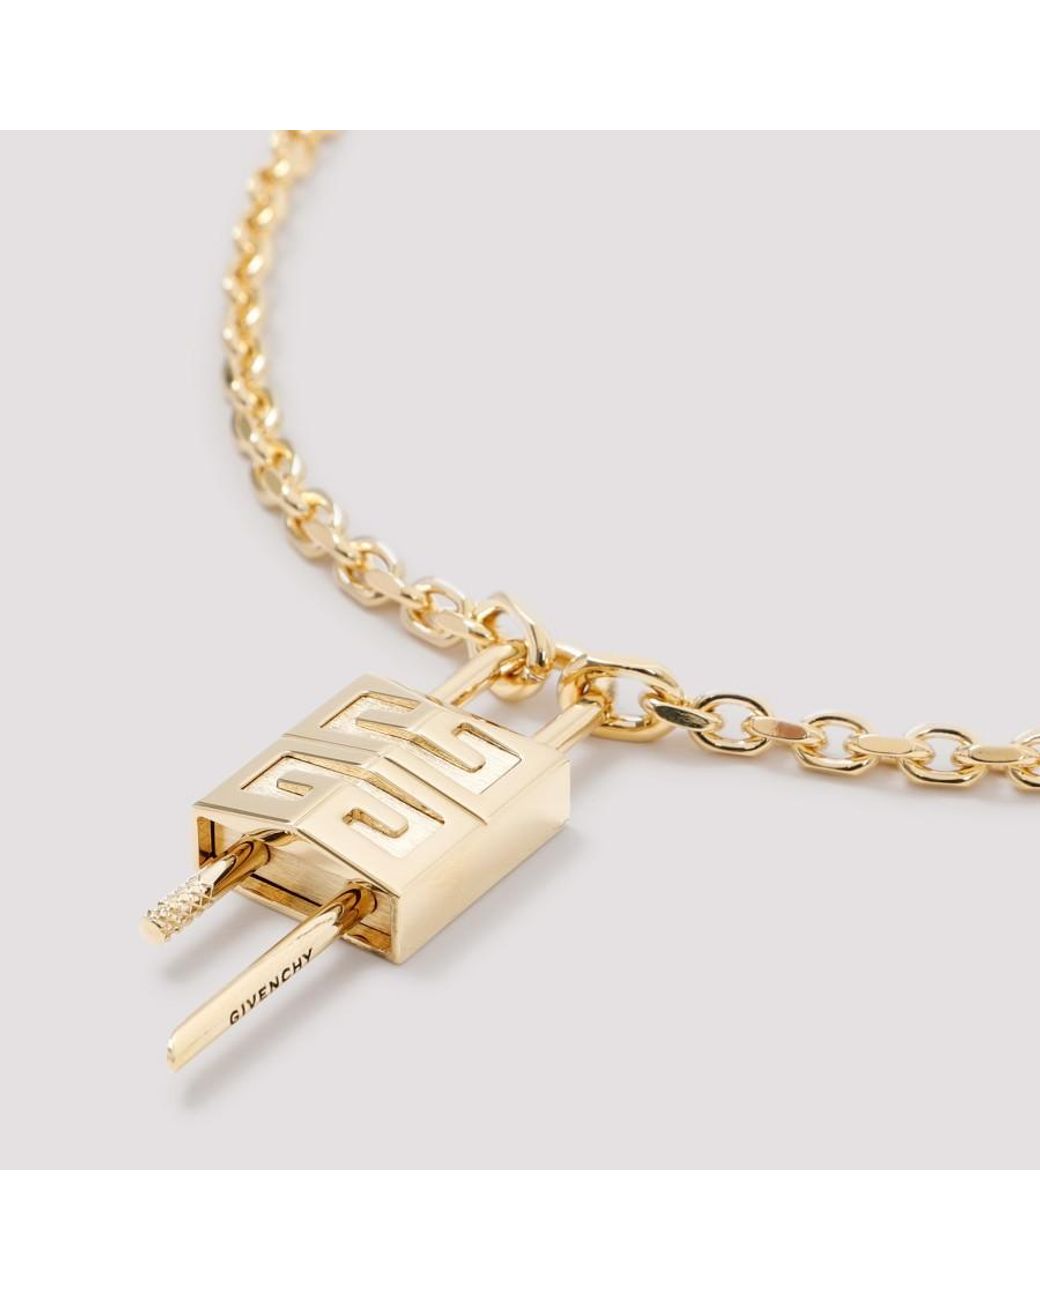 Givenchy G-chain Lock Necklace - Silver | Editorialist